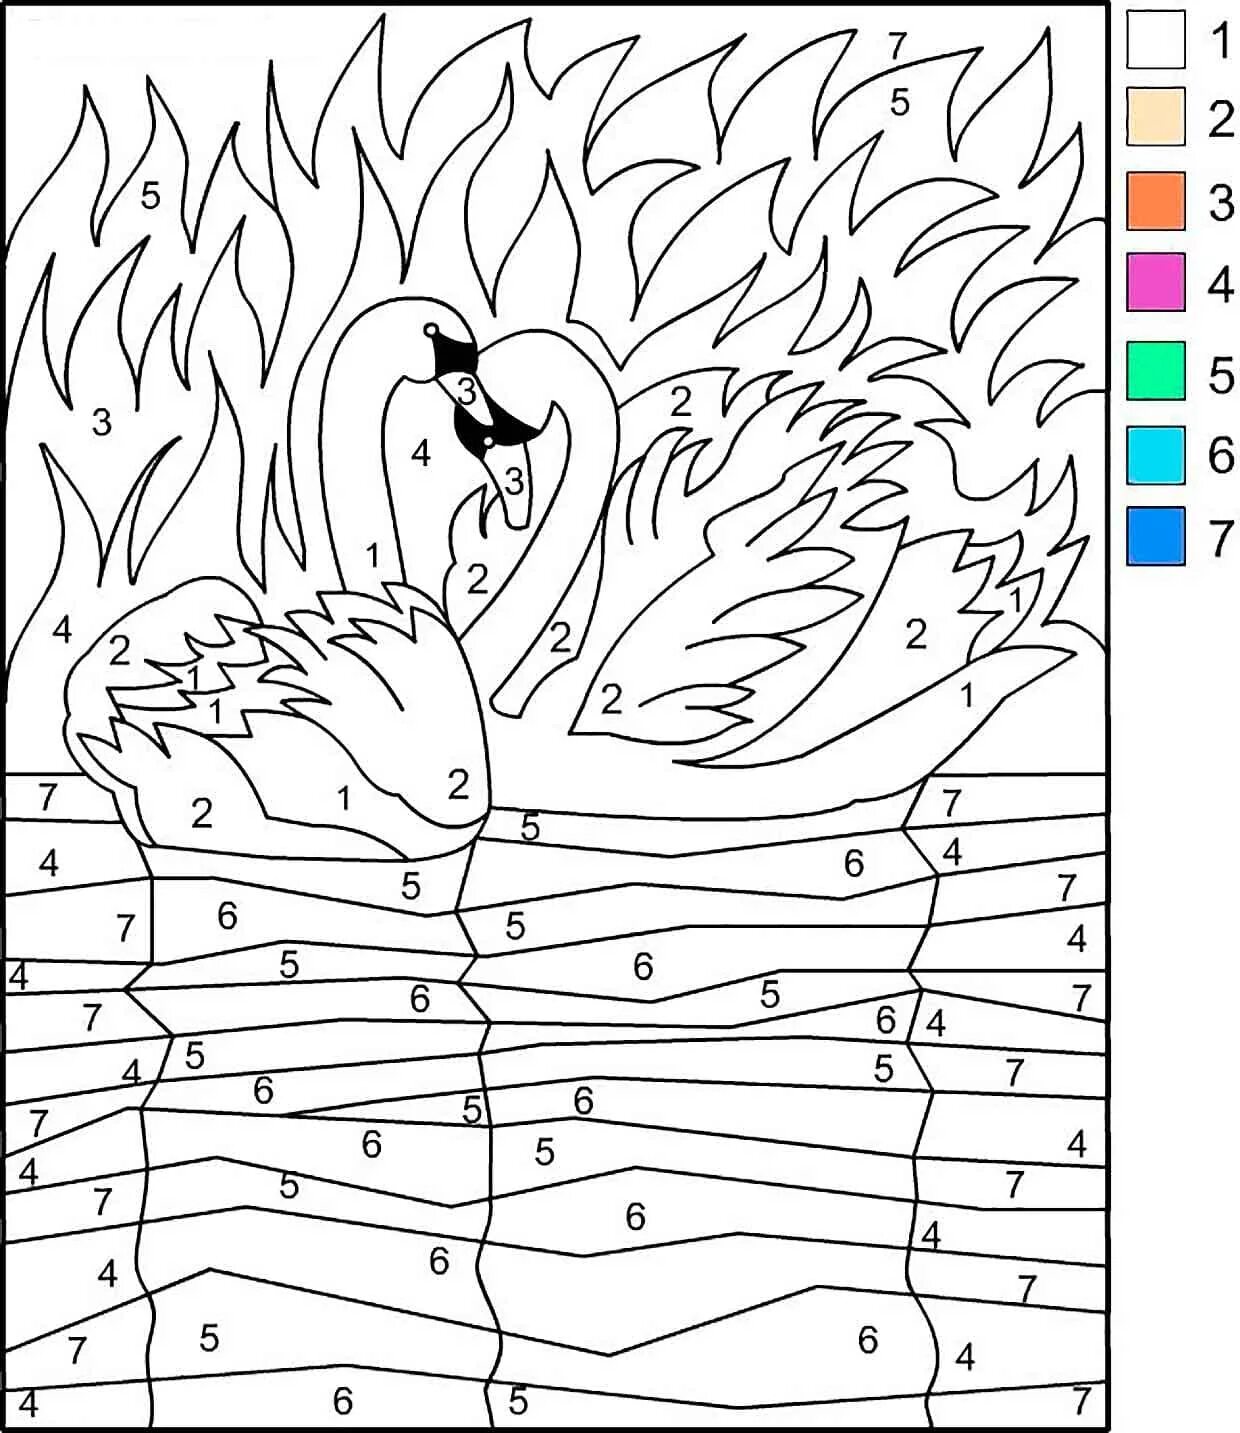 Colorful enchanting number coloring page